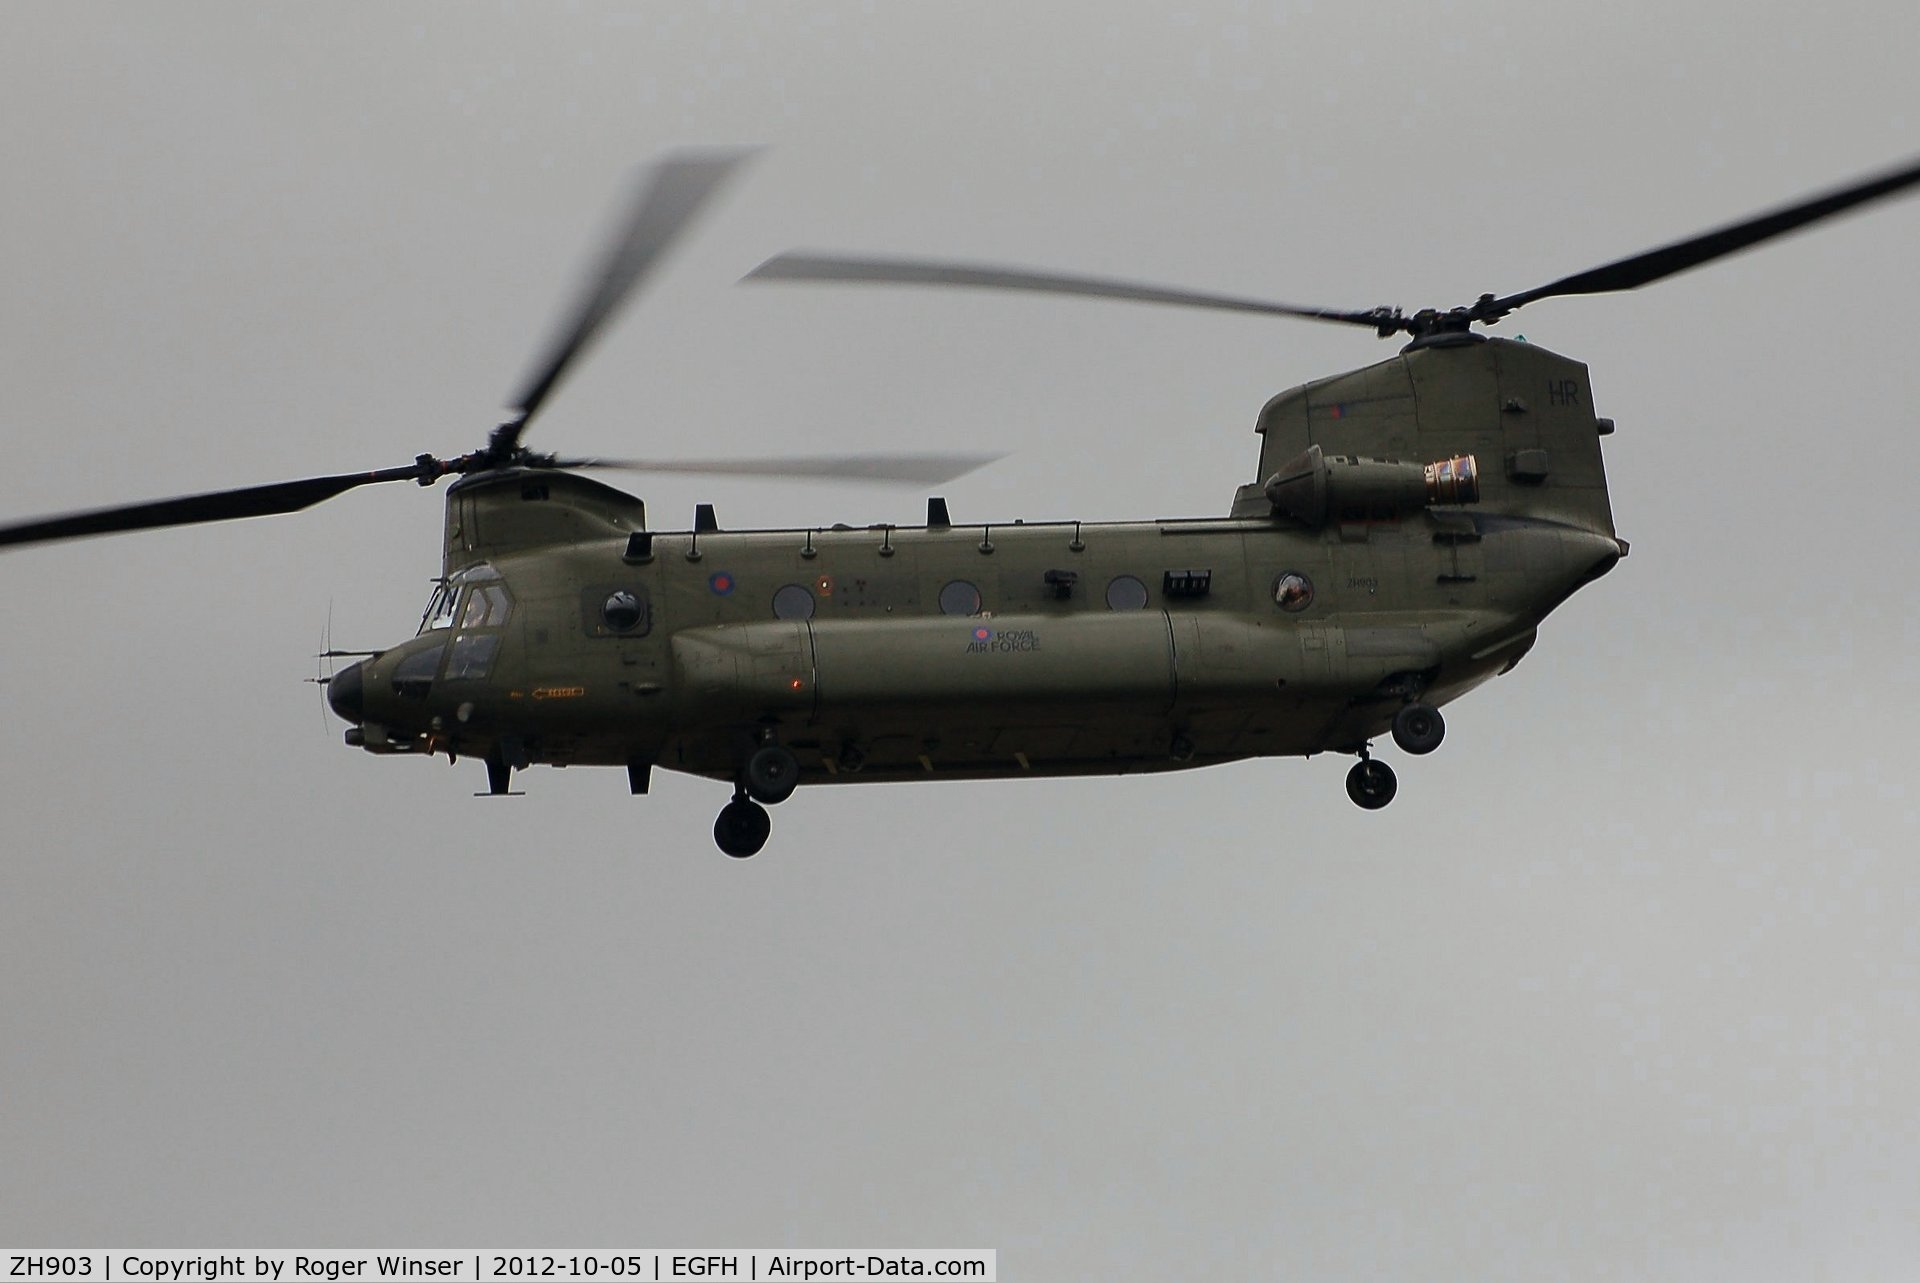 ZH903, Boeing Vertol Chinook HC.3 C/N M4482, Coded HR. Flypast by two RAF Chinook helicopters over Swansea Airport. ZH903 was led by ZH904 en-route to RAF Pembrey Sands Air Weapons Range (EGOP).